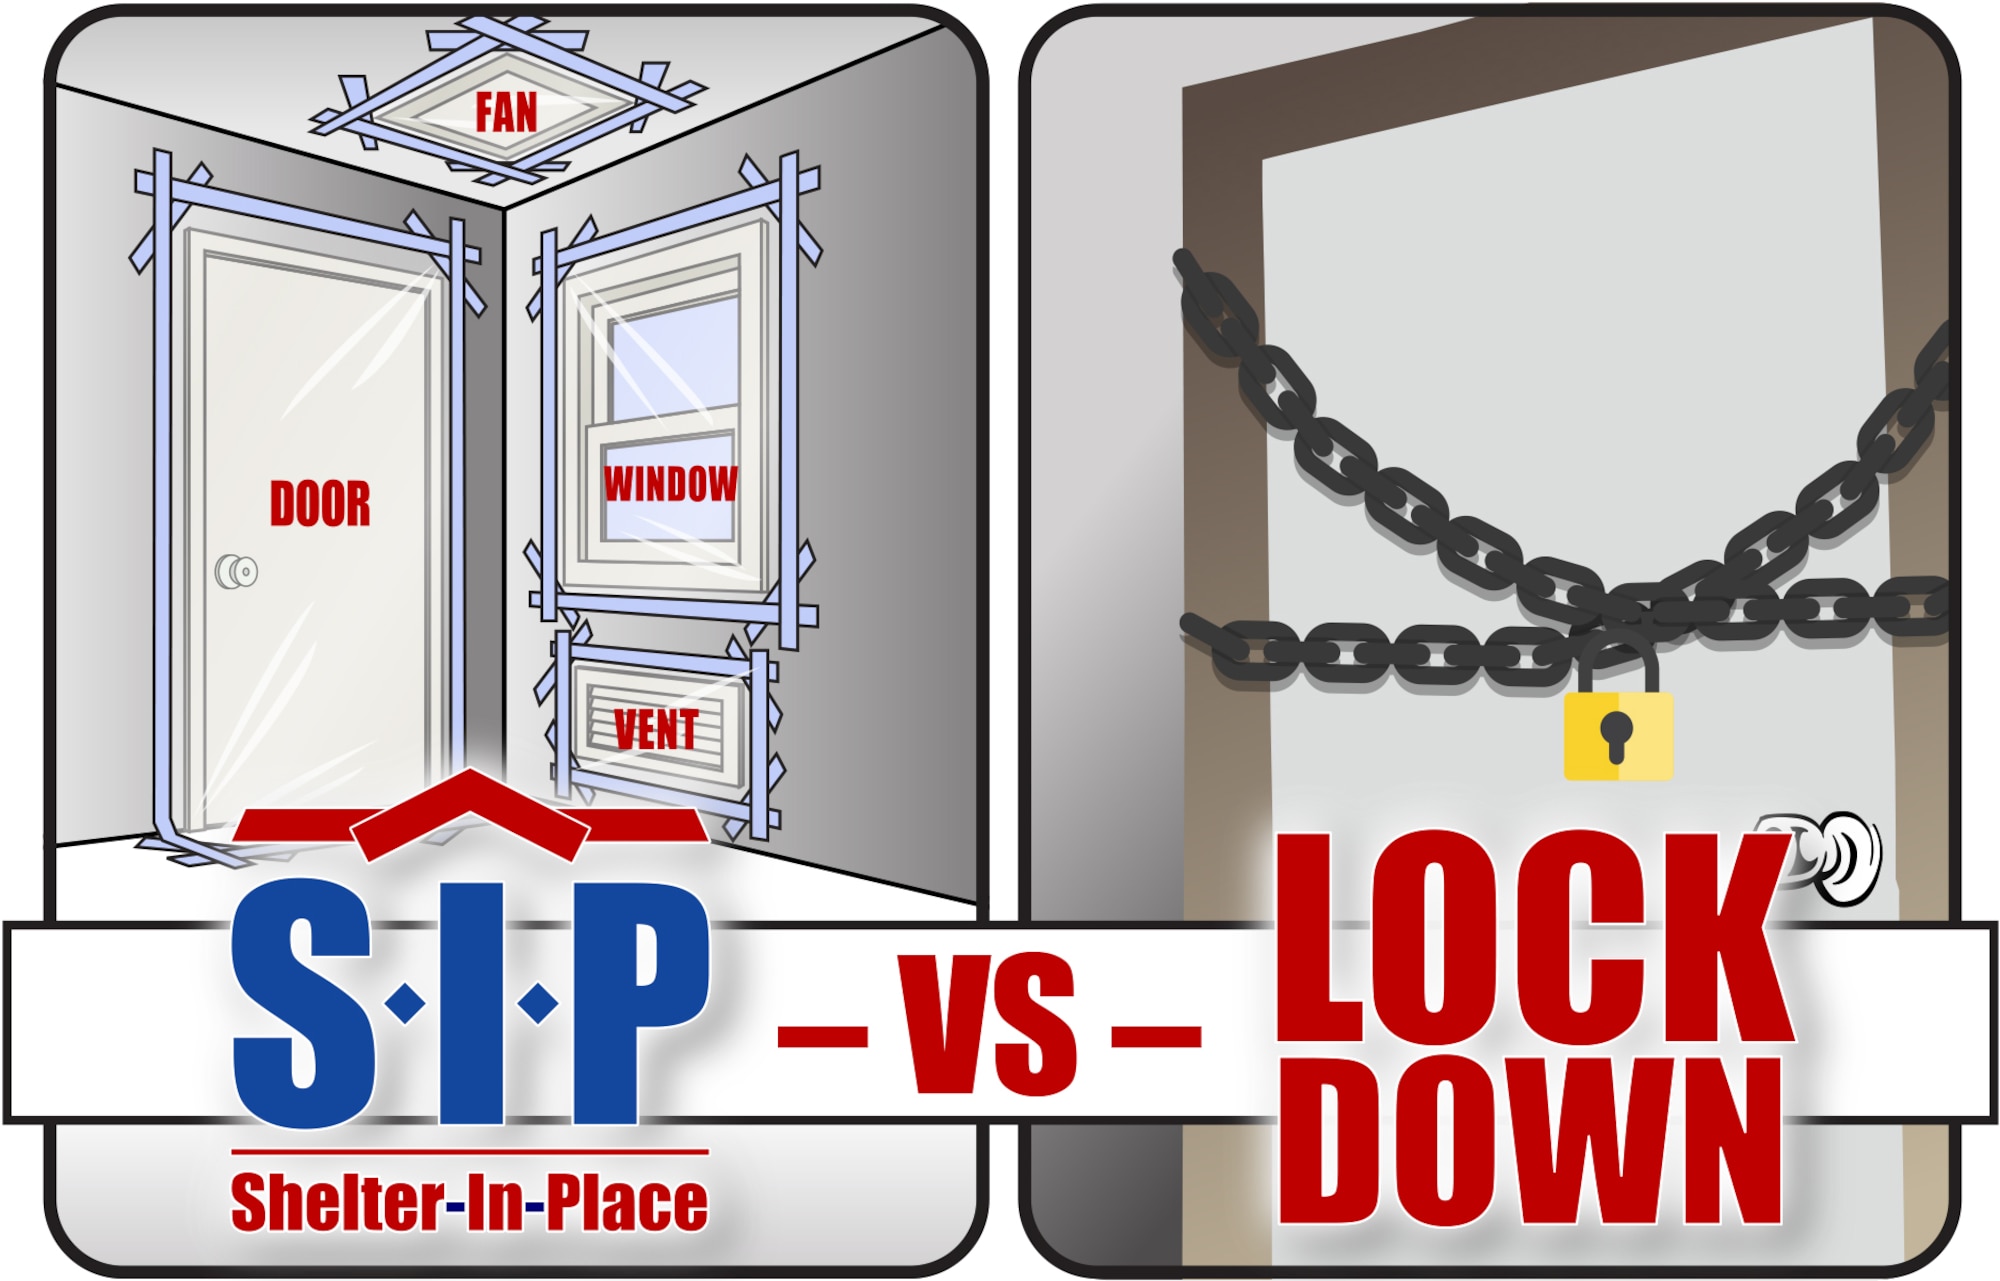 The difference between Shelter-In-Place and Lockdown